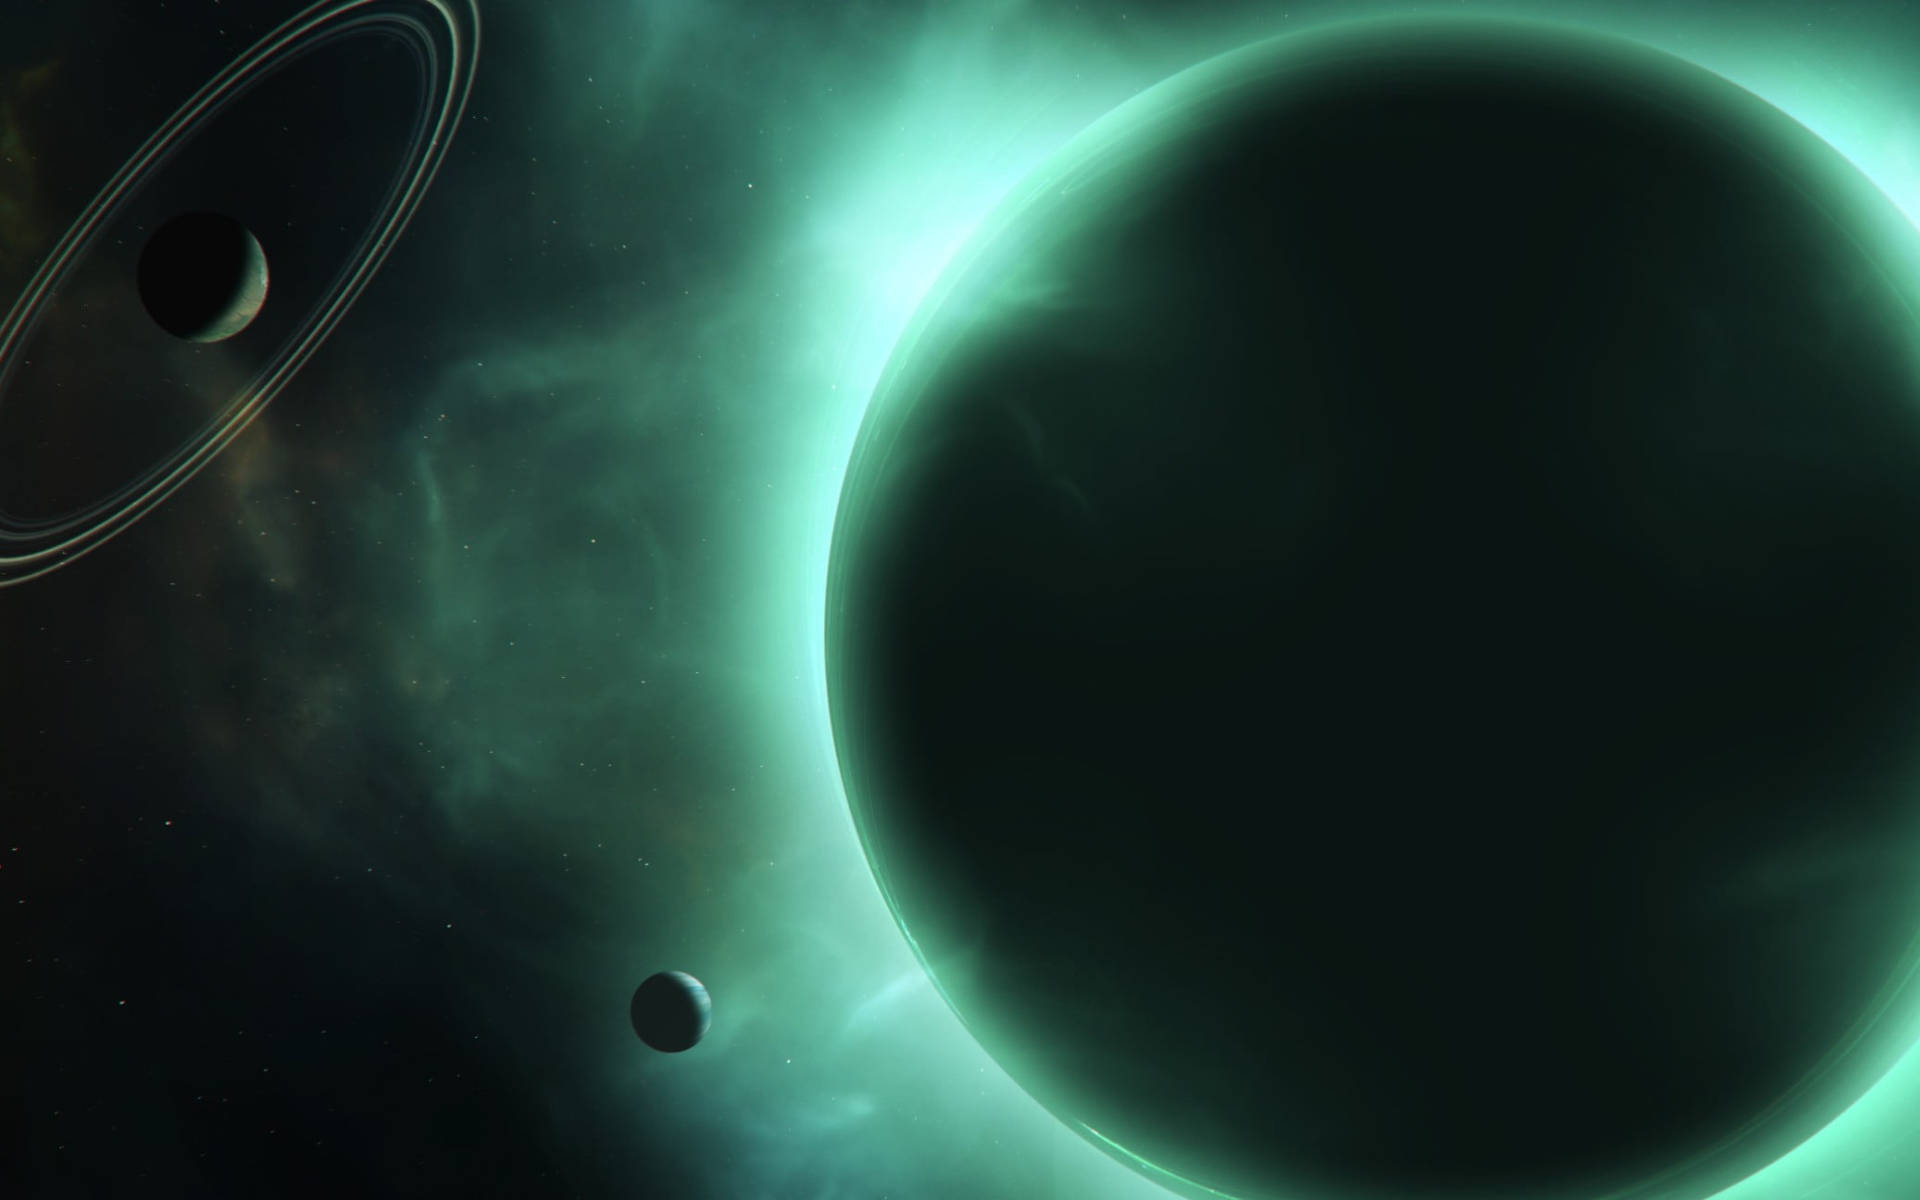 Black Planet In Bright Green Cosmos